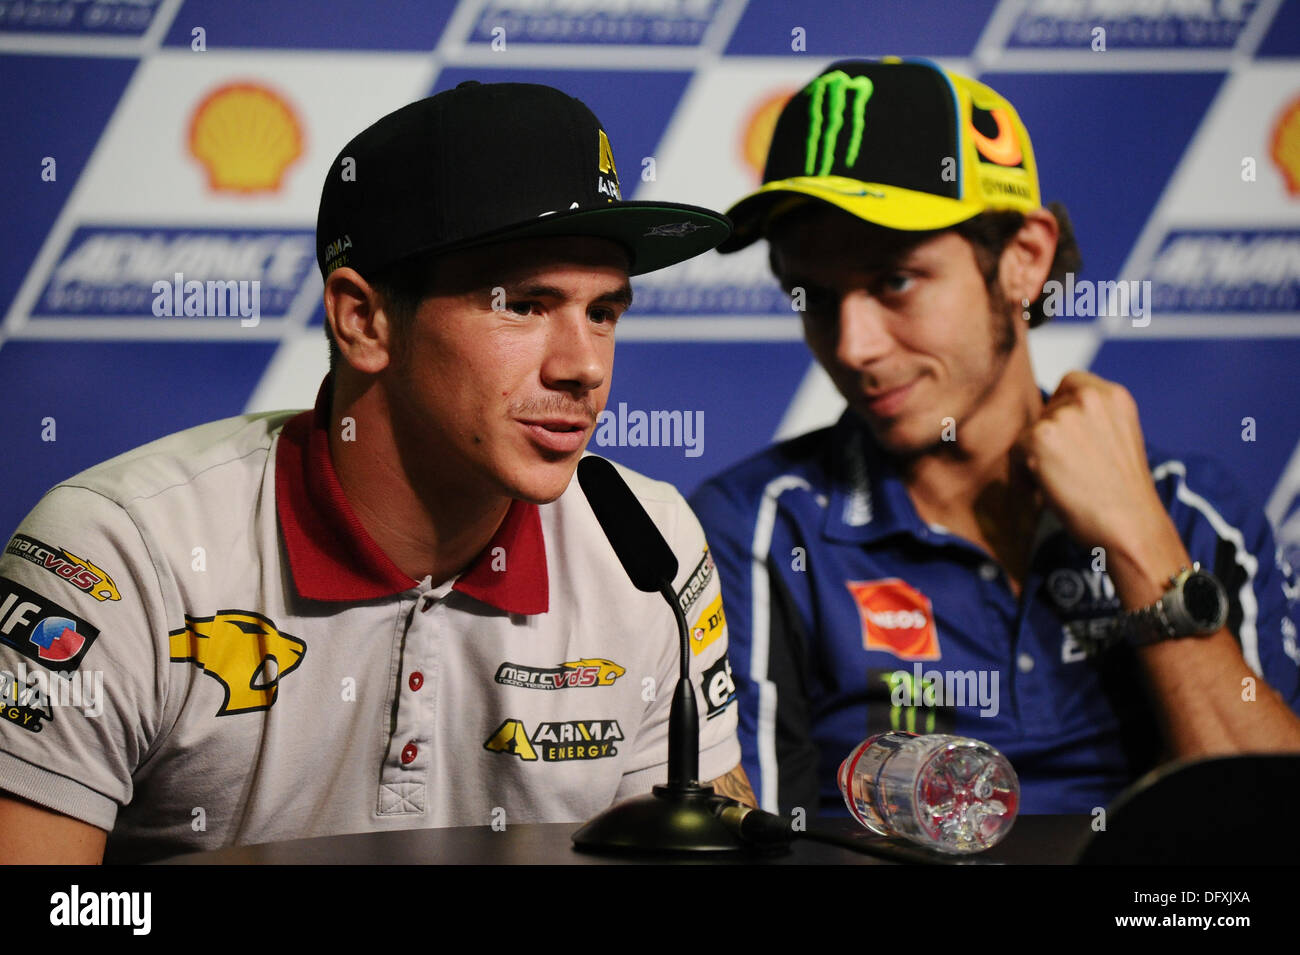 Sepang, Malaysia. 10th october 2013. Scott Redding and Valentino Rossi  during the pre event press conference at Sepang circuit Credit:  Gaetano Piazzolla/Alamy Live News Stock Photo